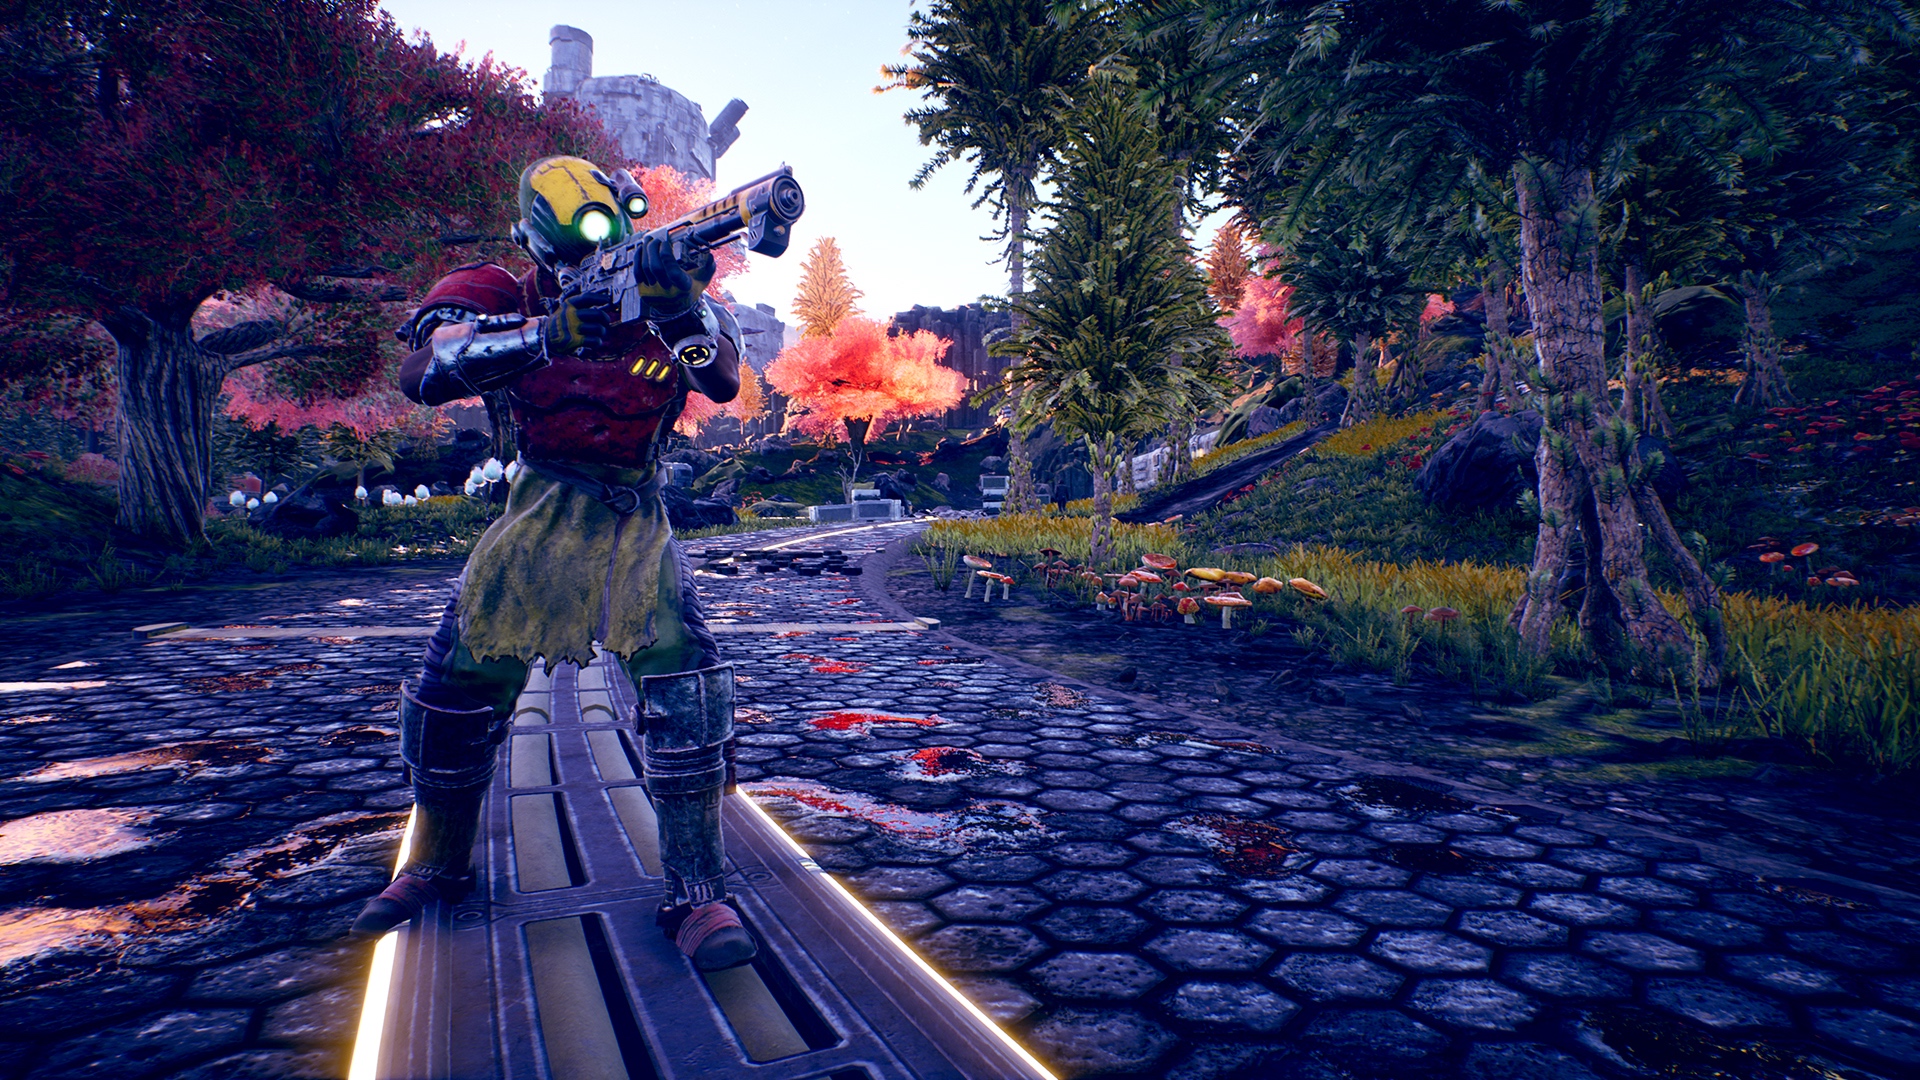 The Switch version of The Outer Worlds has been updated to version